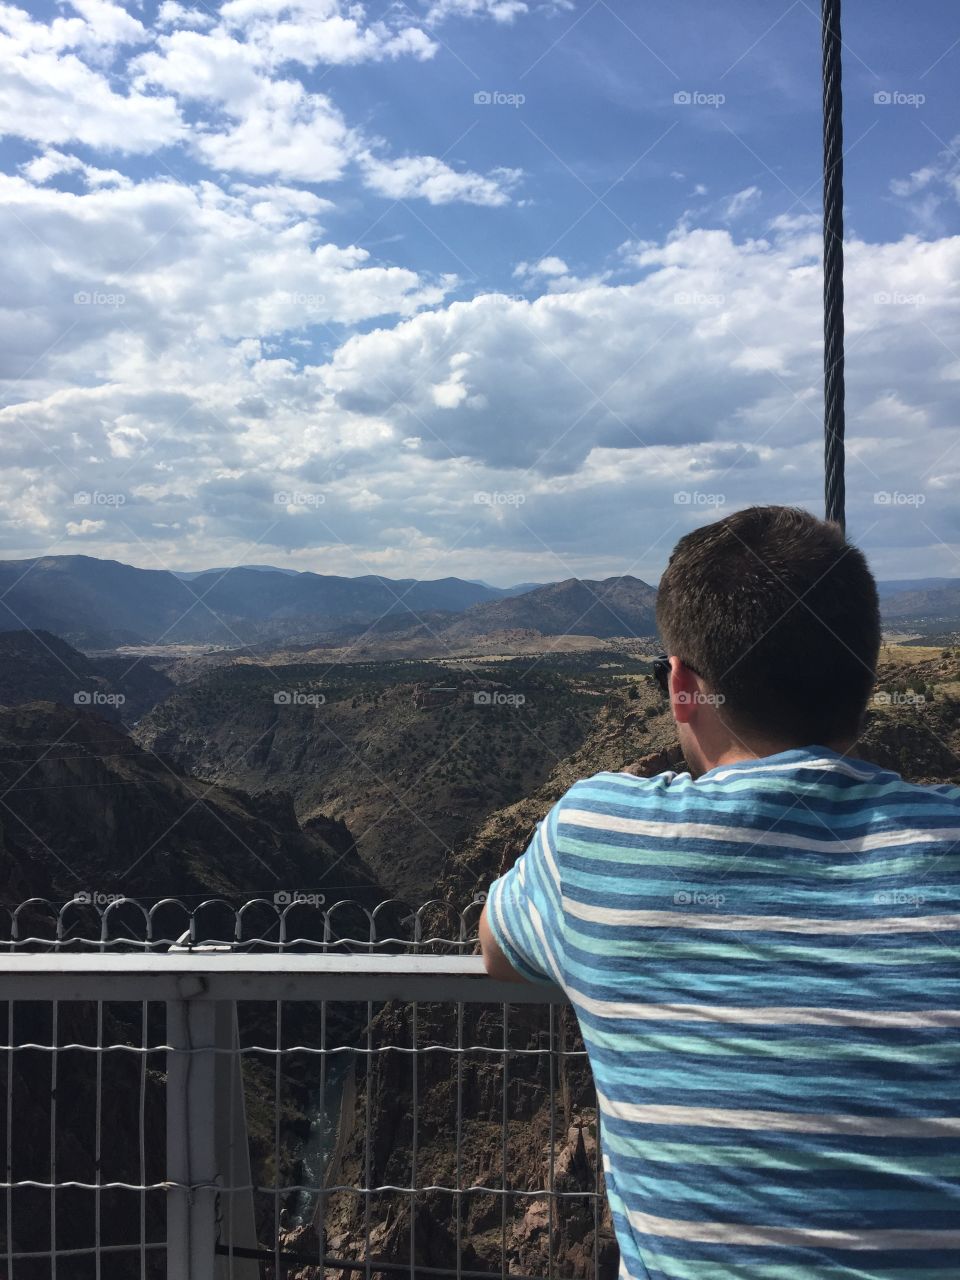 Looking out over the Royal Gorge.